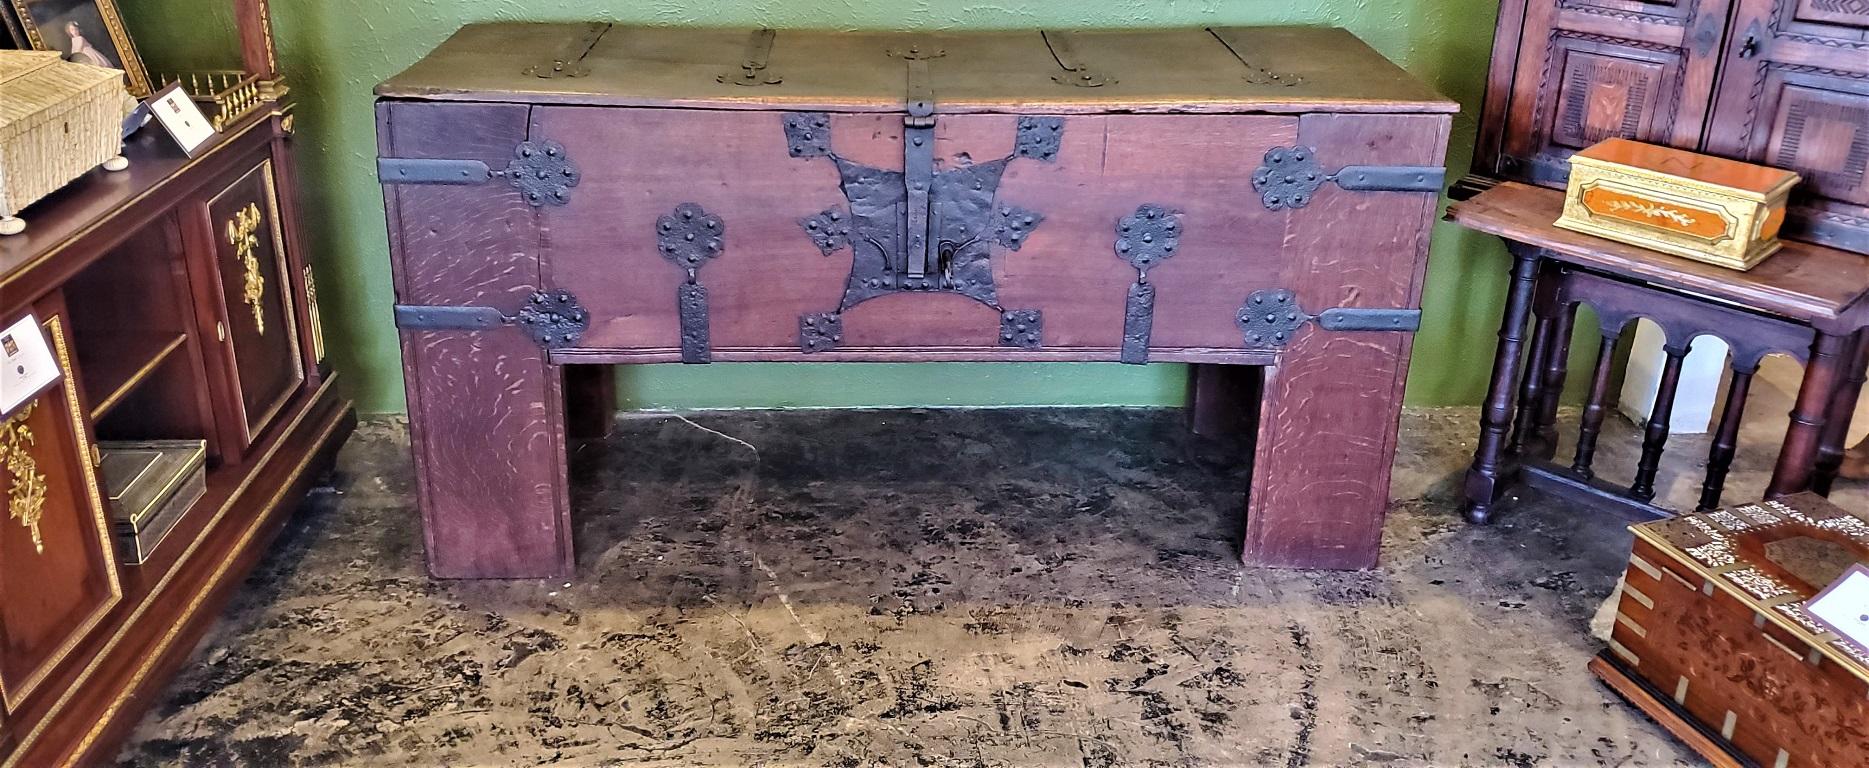 Rare Late Medieval 16th Century German Wrought Iron Oak Chest or Stollentruhe For Sale 10